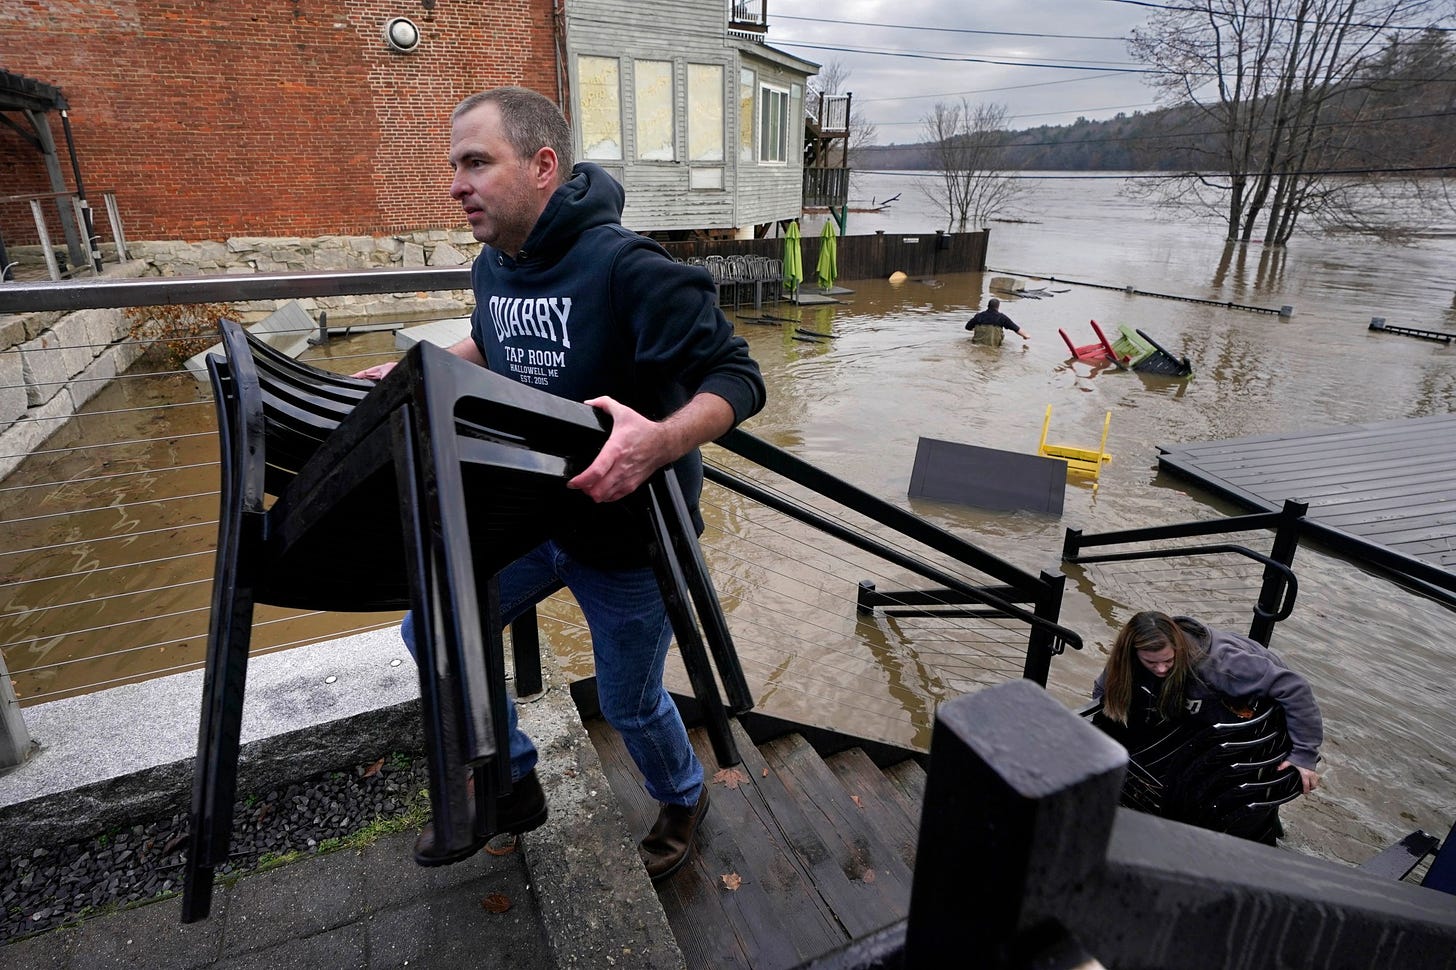 Joe Stanhope and Tori Grasse carry furniture from the flooded outdoor patio of the Quarry Tap Room, Tuesday, Dec. 19, 2023, in Hallowell, Maine. Nathan Stanhope, rear, wades through the flood water to retrieve more items. Waters continue to rise in the Kennebec River following Monday's severe storm. (AP Photo/Robert F. Bukaty)